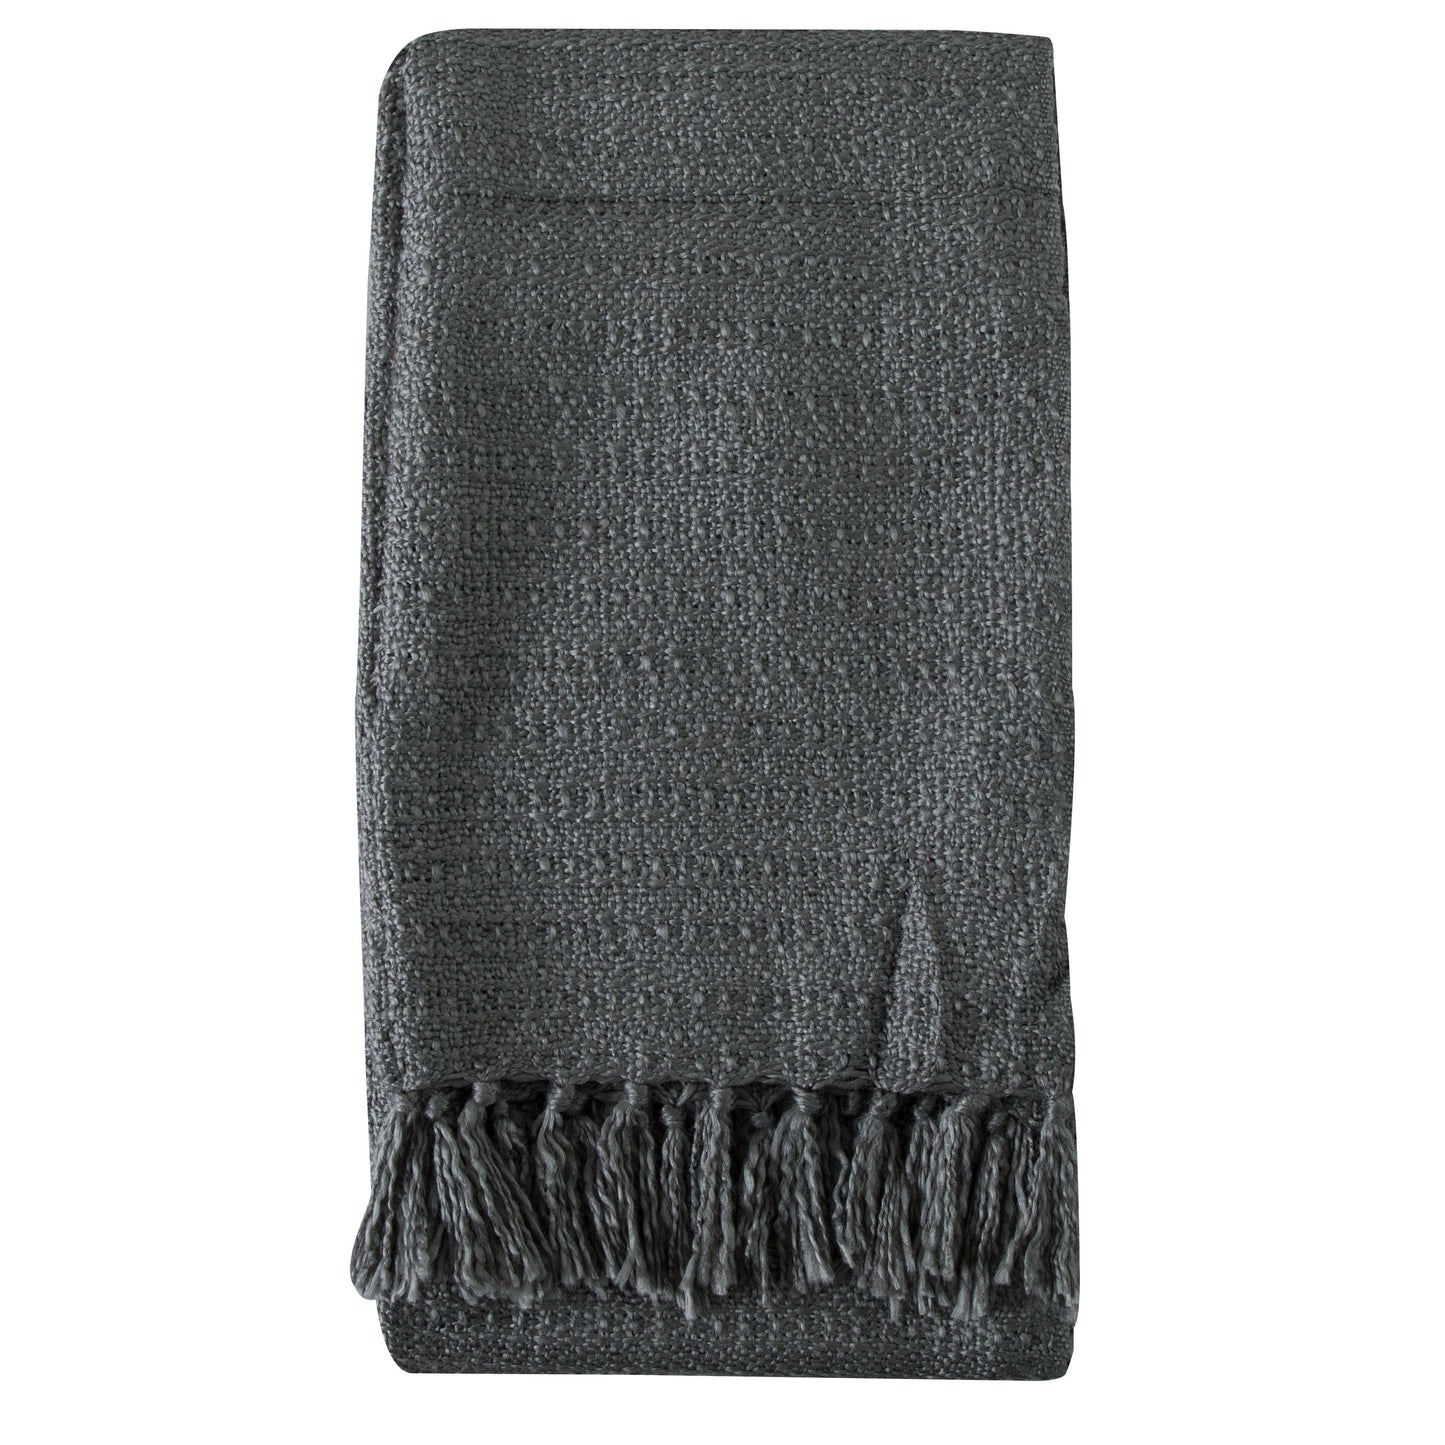 An Acrylic Textured Throw by Kikiathome.co.uk is a stylish addition to your home furniture and interior decor.